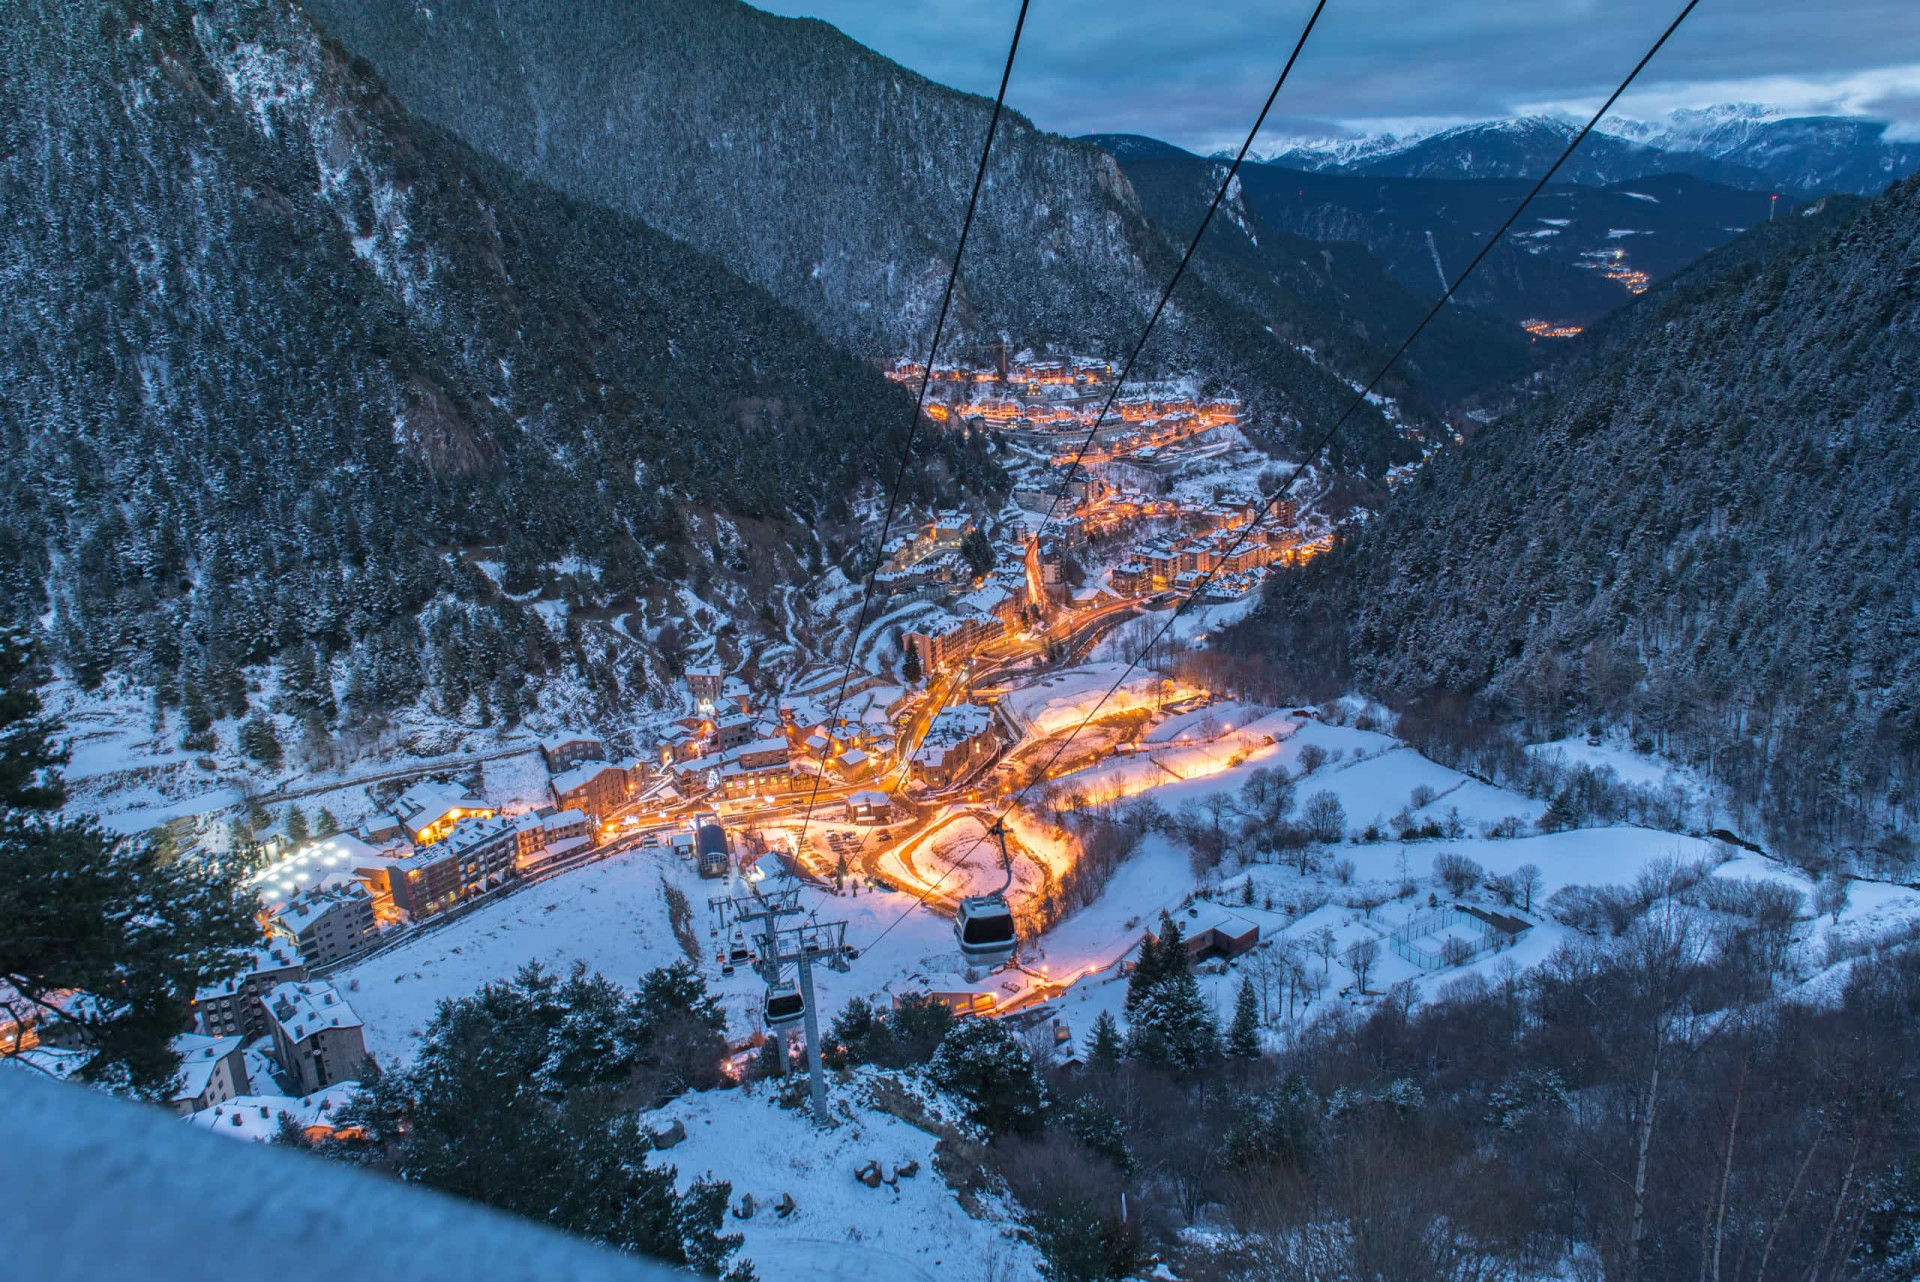 <p>Vallnord, the premier ski resort in the western part of Andorra, boasts a total of 39 miles (63 km) of marked terrain. Once the sun goes down, the cozy ski village at the foot of the mountain is a perfect place to relax.</p><p>You may also like:<a href="https://www.starsinsider.com/n/406112?utm_source=msn.com&utm_medium=display&utm_campaign=referral_description&utm_content=597567en-za"> Celebrity couples who coordinate outfits</a></p>